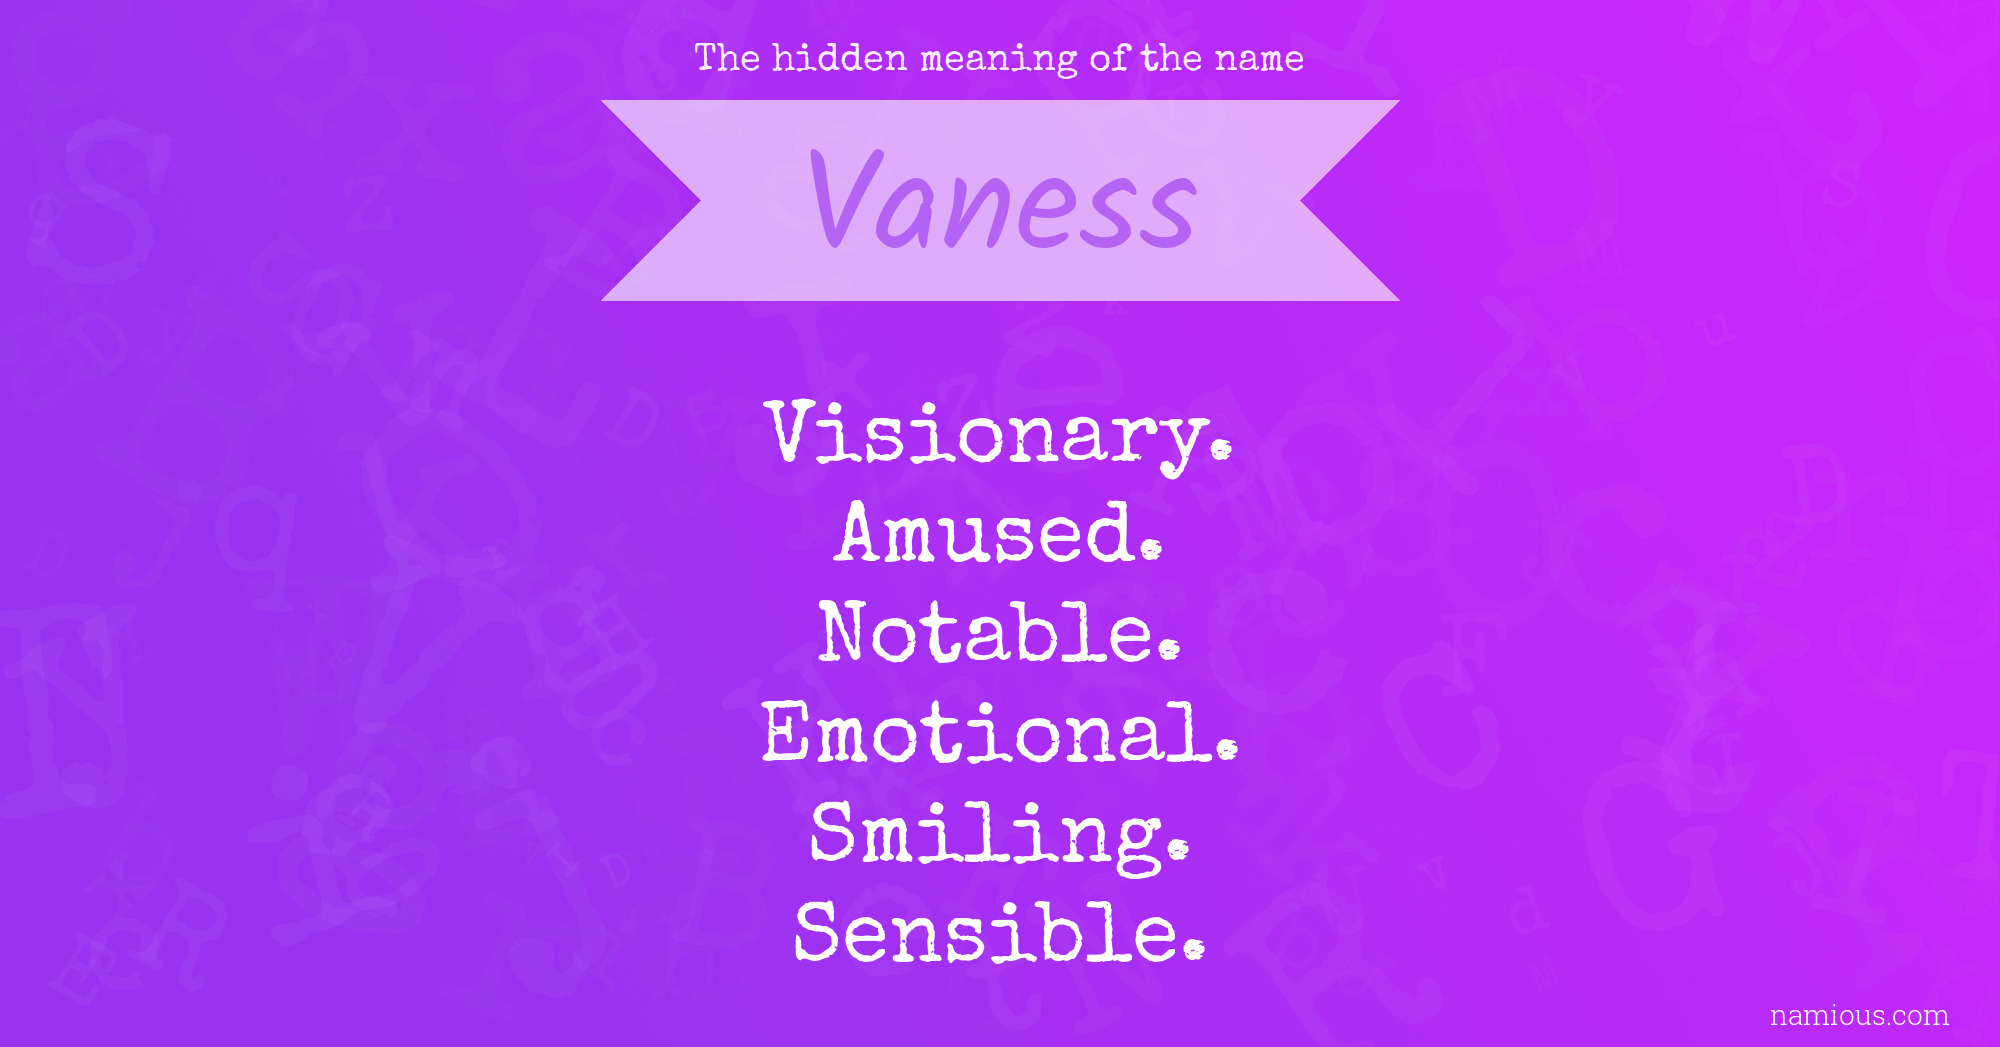 The hidden meaning of the name Vaness